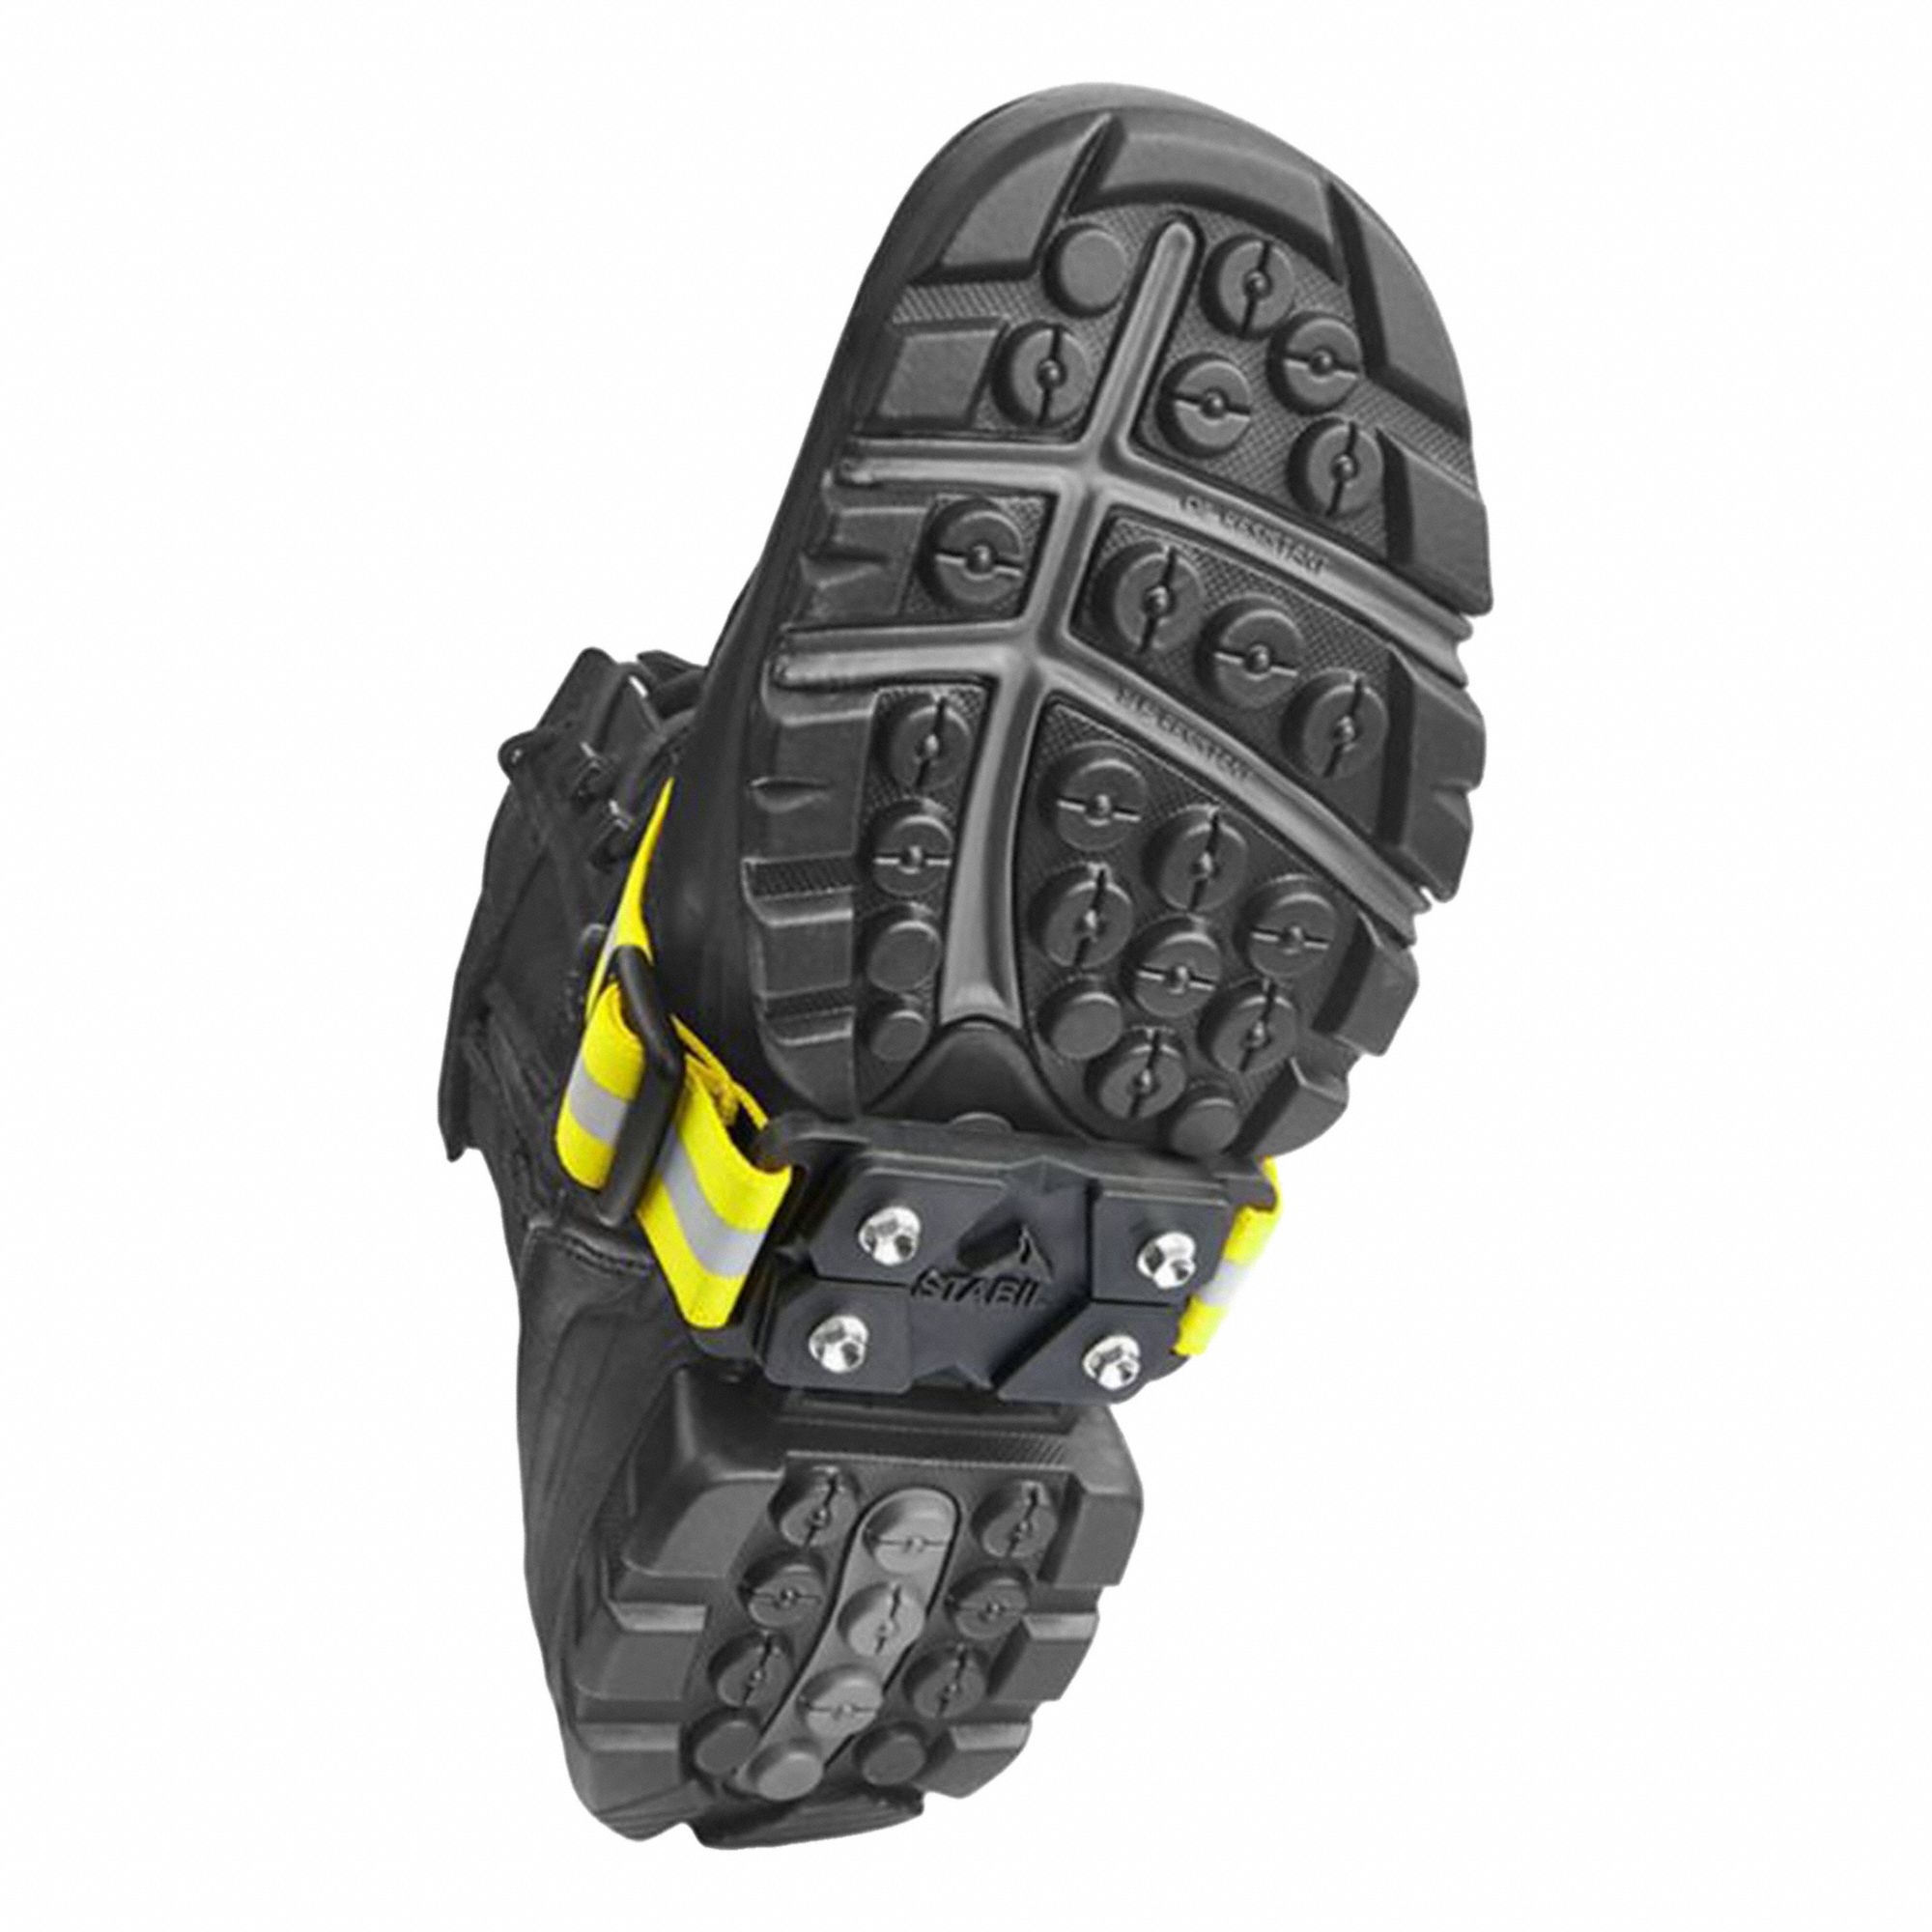 UNISEX ICE CLEATS, UNIVERSAL, THERMOPLASTIC, BLACK/HI VIS, STRAP ATTACHMENT, STEEL TRACTION